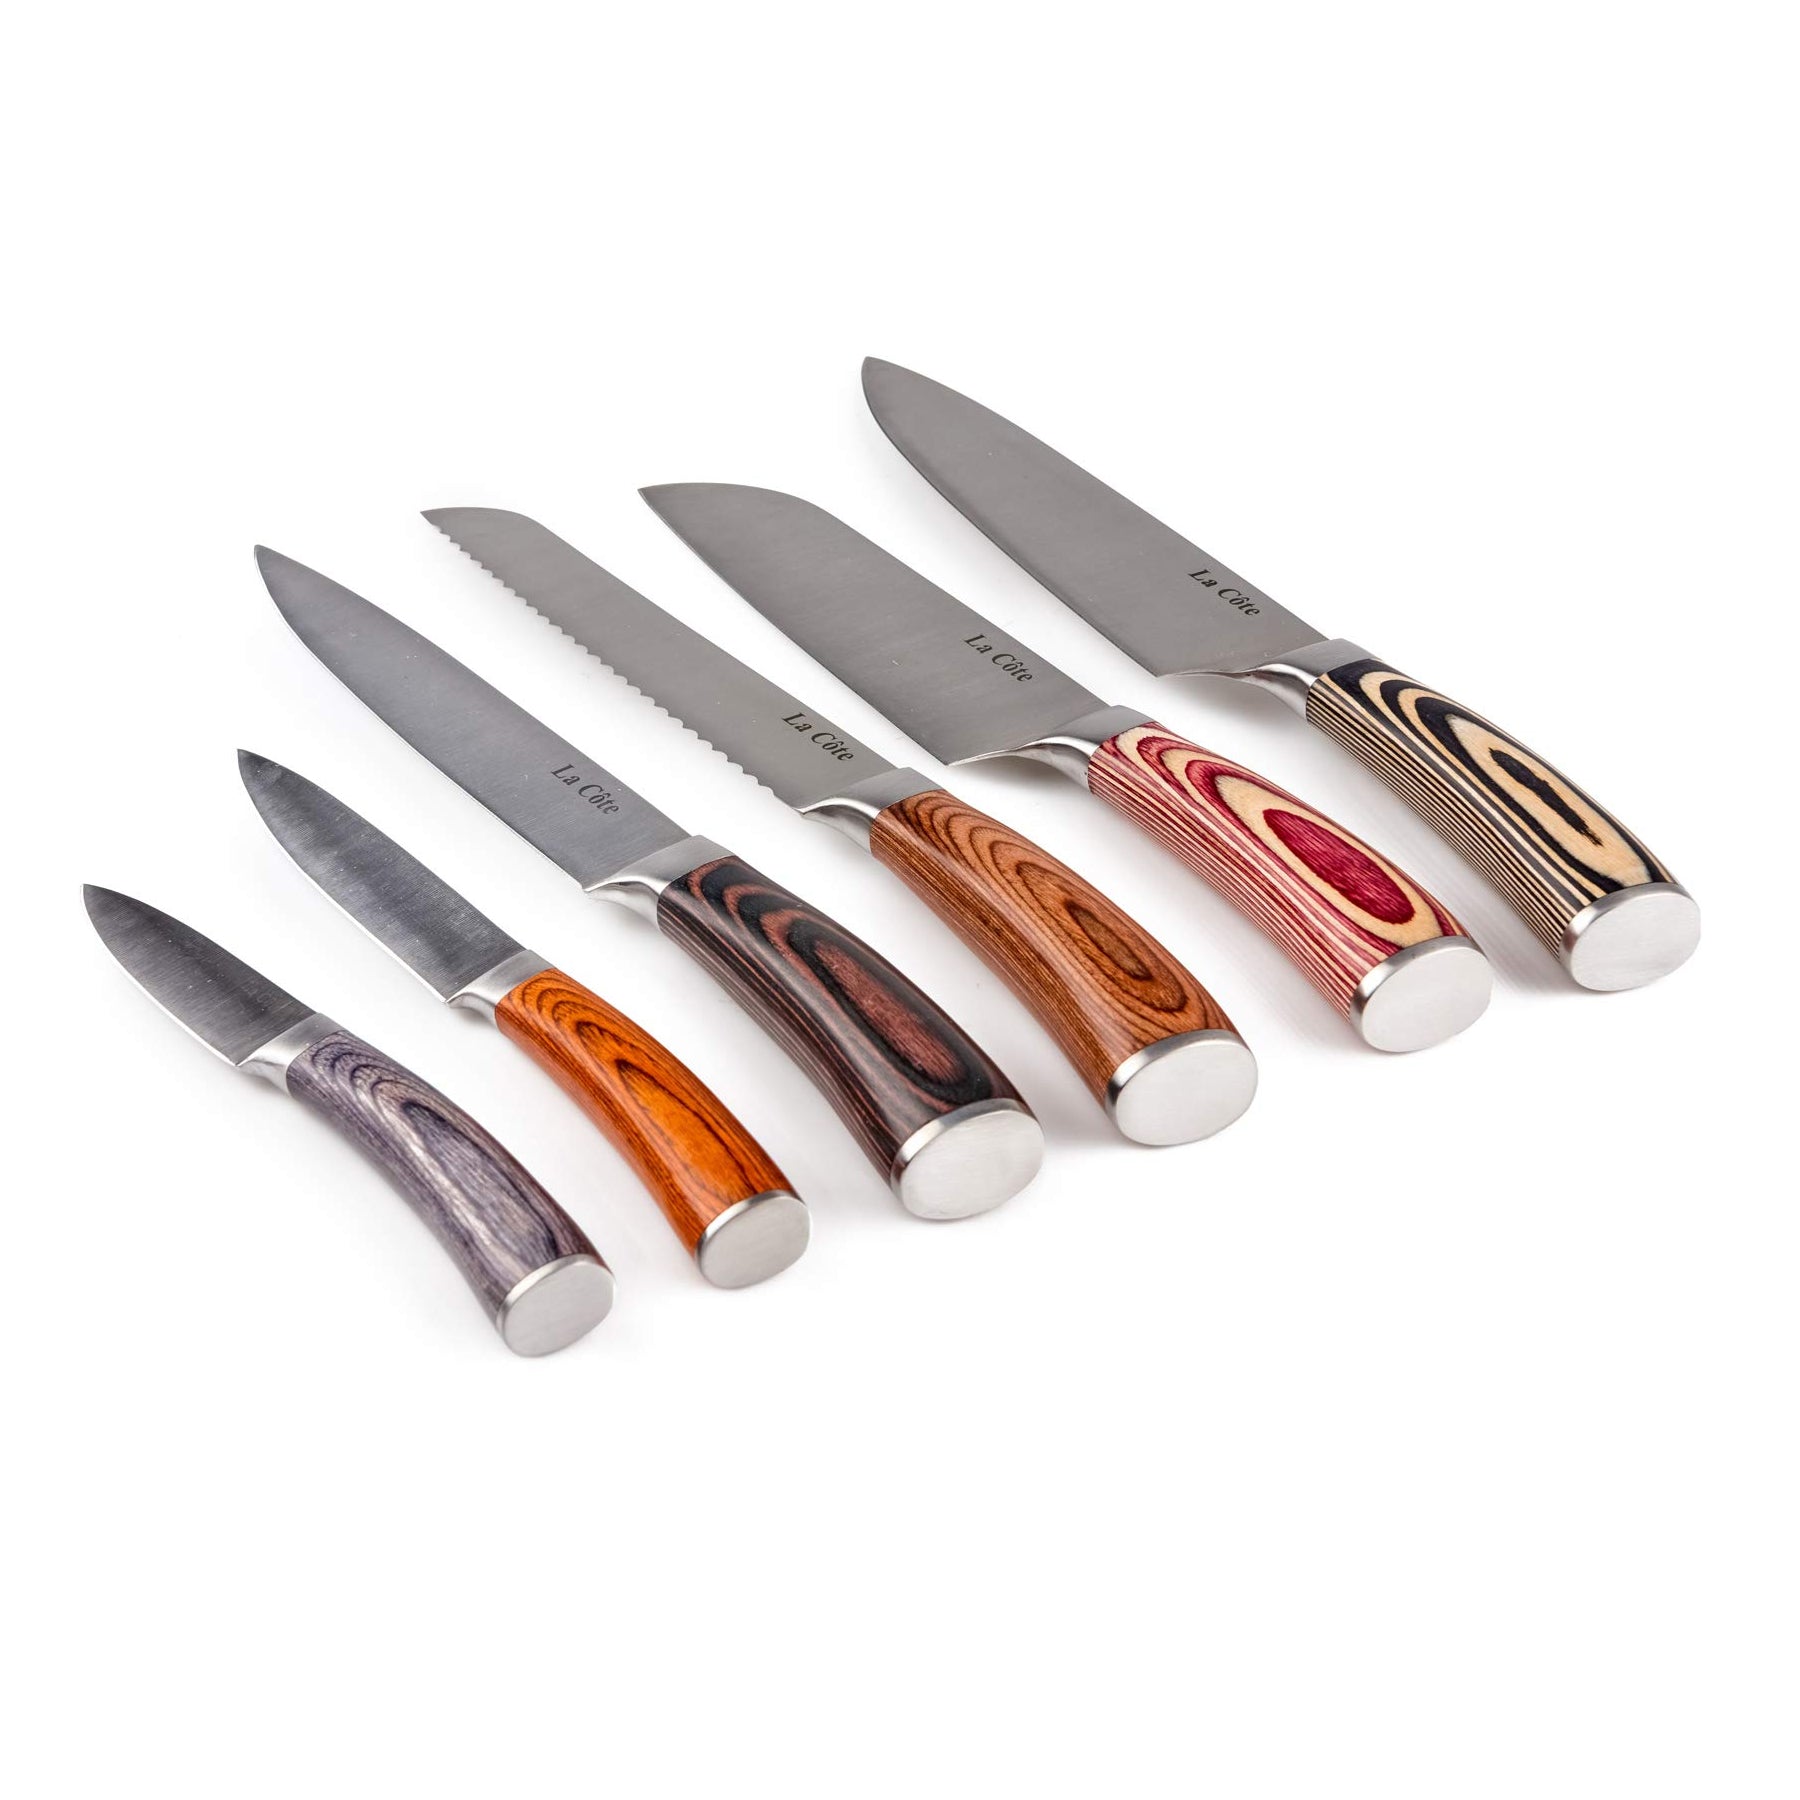 La Cote 6 Piece Chef Knives Set Japanese Stainless Steel Wood Handle in Gift Box (6 PC Chef Knife Set - Pakka Multi)